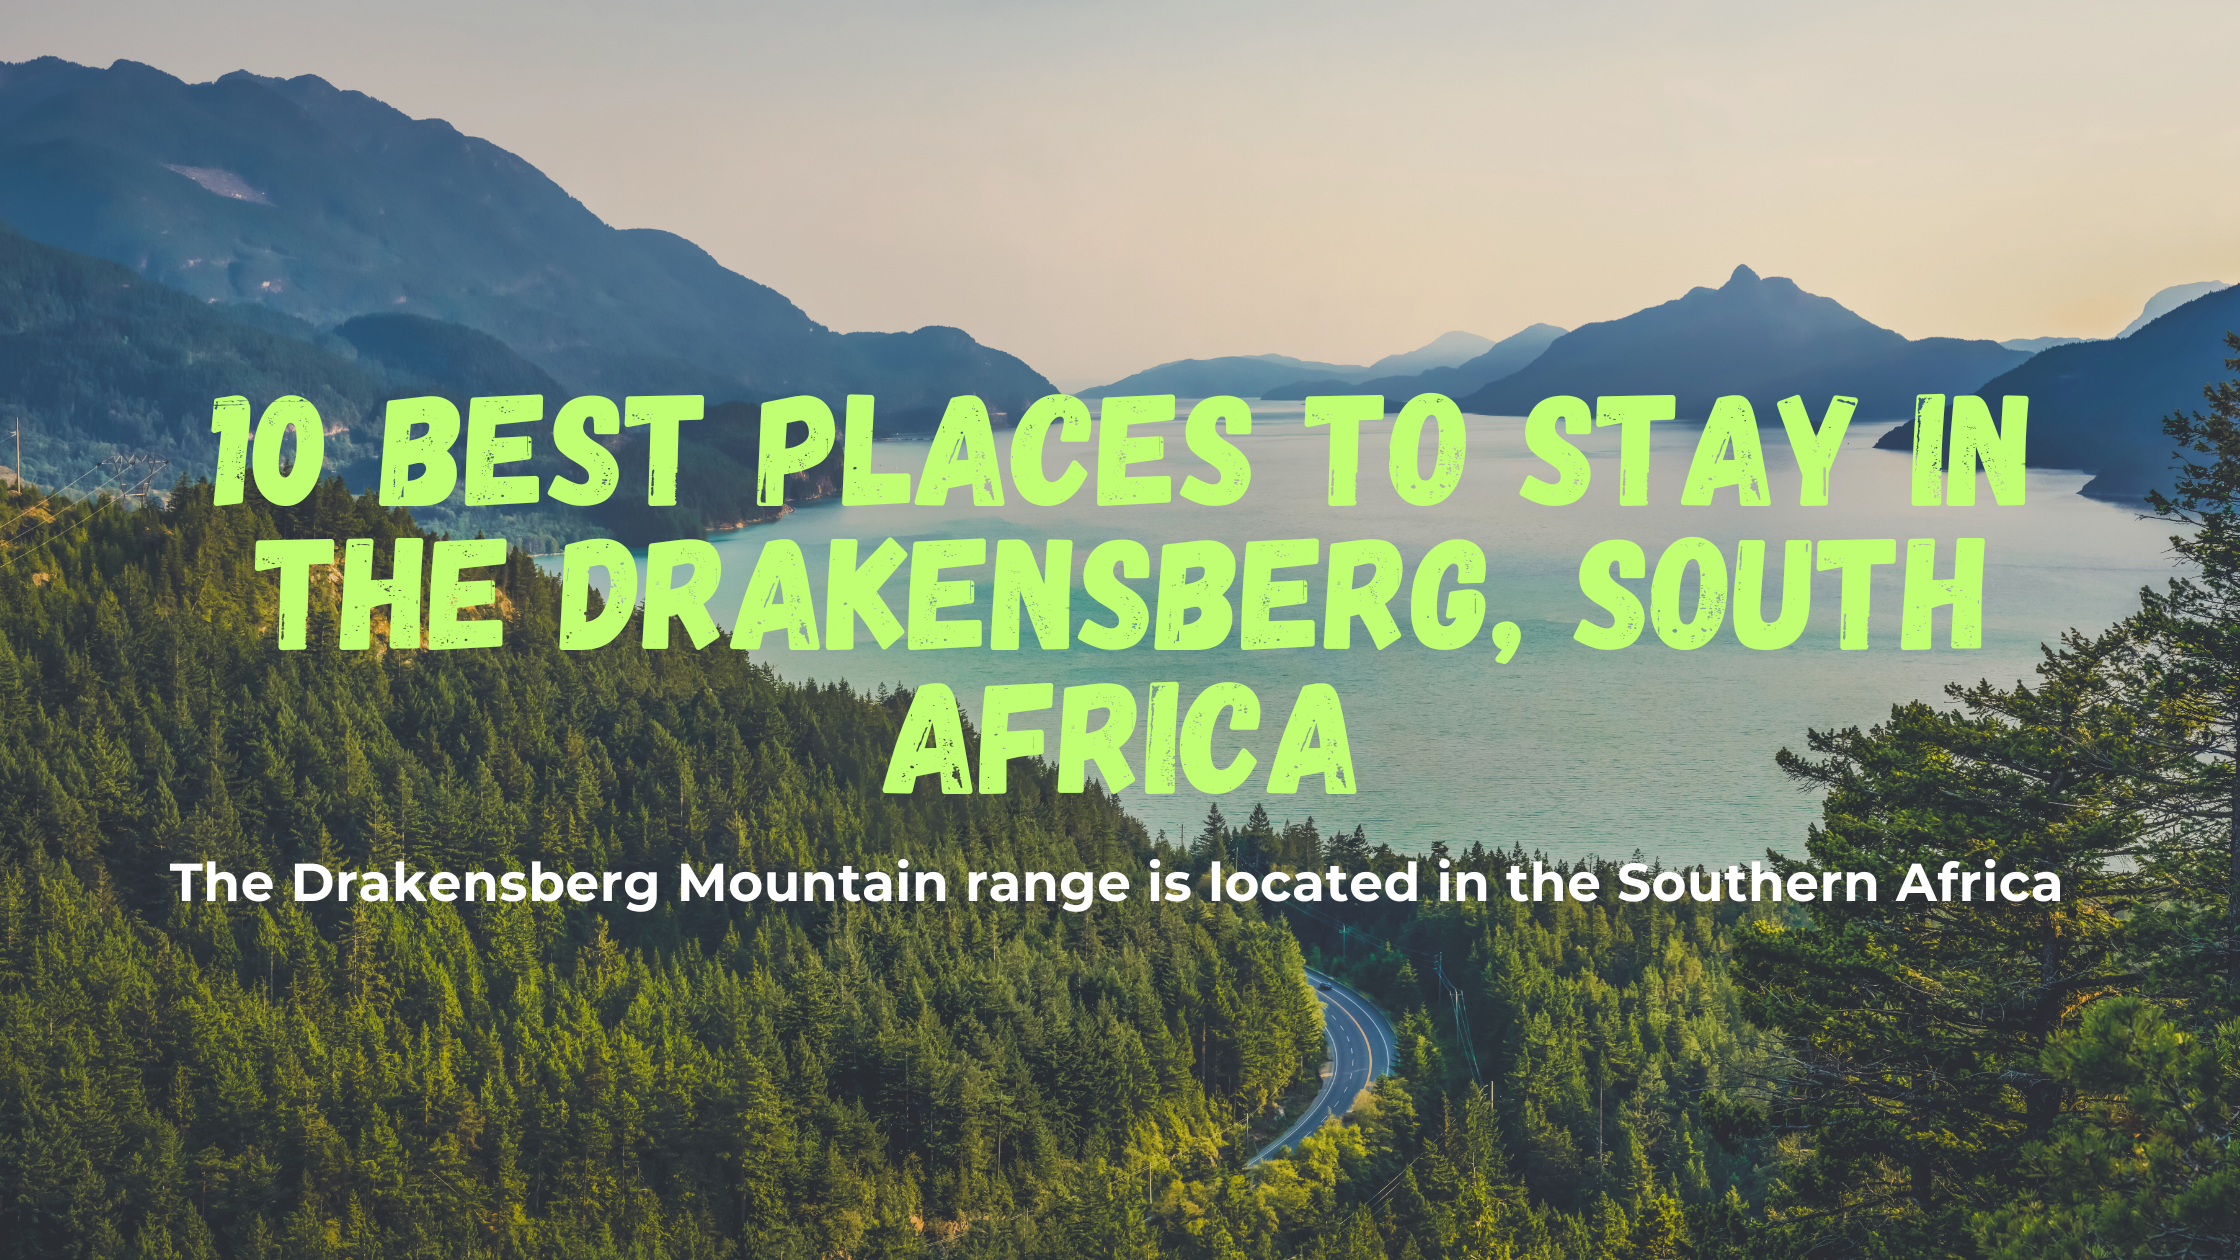 10 Best Places to Stay In the Drakensberg